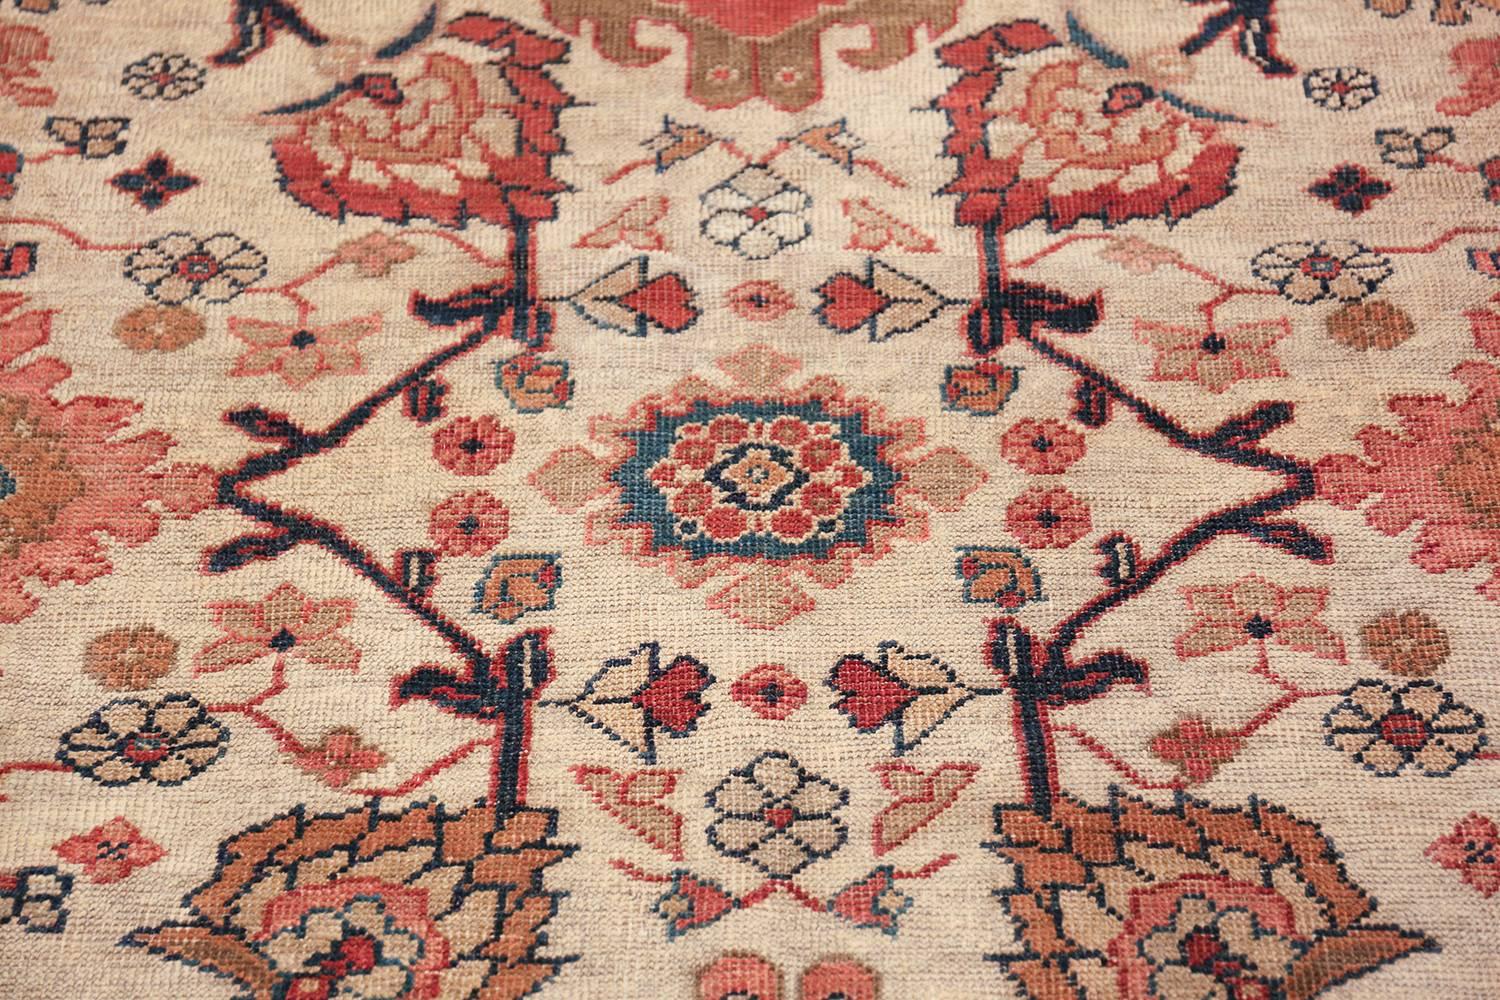 Magnificent ivory background antique Sultanabad Persian rug, country of origin / rug type: Persian rug, date circa 1900
Antique Sultanabad rugs The city of Sultanabad (which is now known as Arak) was founded, in the early 1800s, as a center for